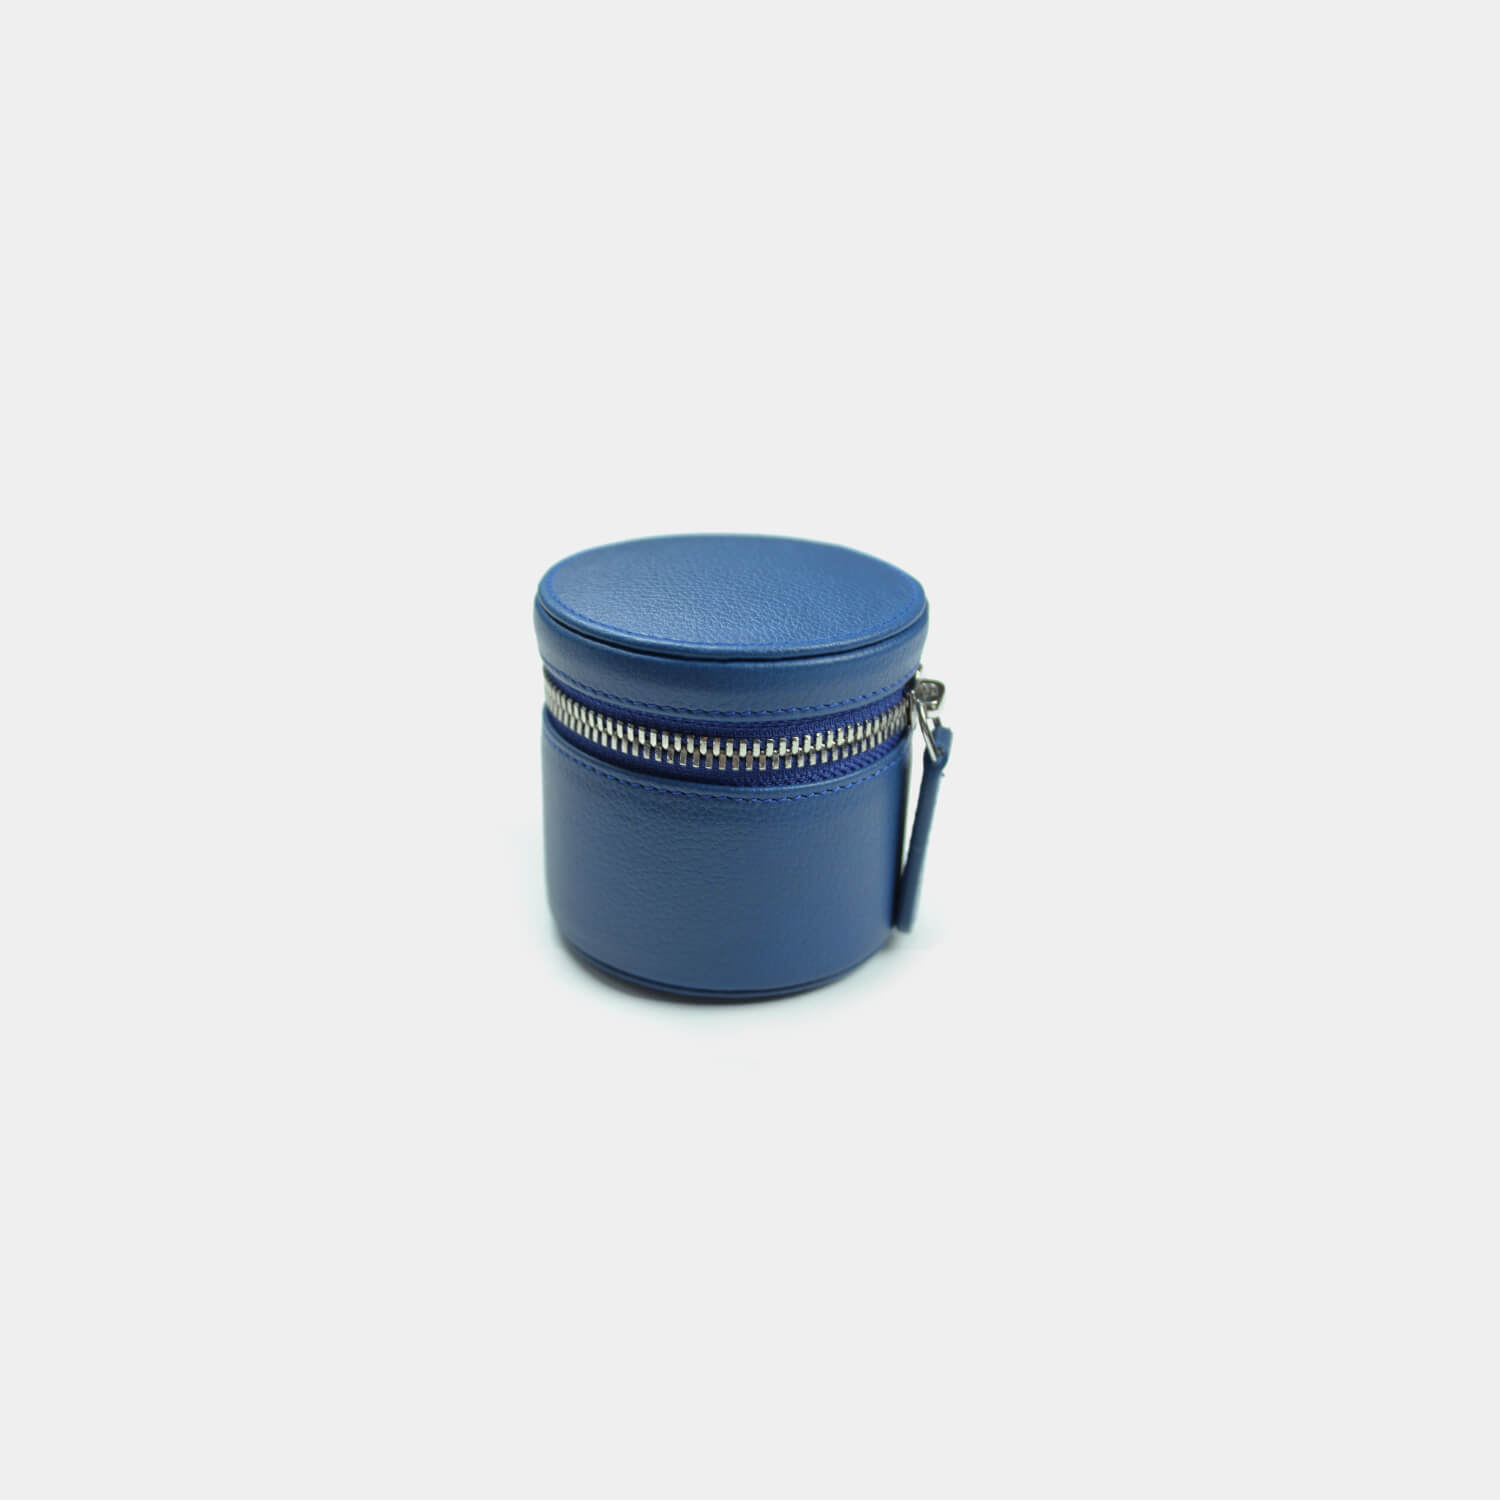 Fine grain leather small round jewellery case for jewellery, cufflinks, headphones. Branded with your company logo